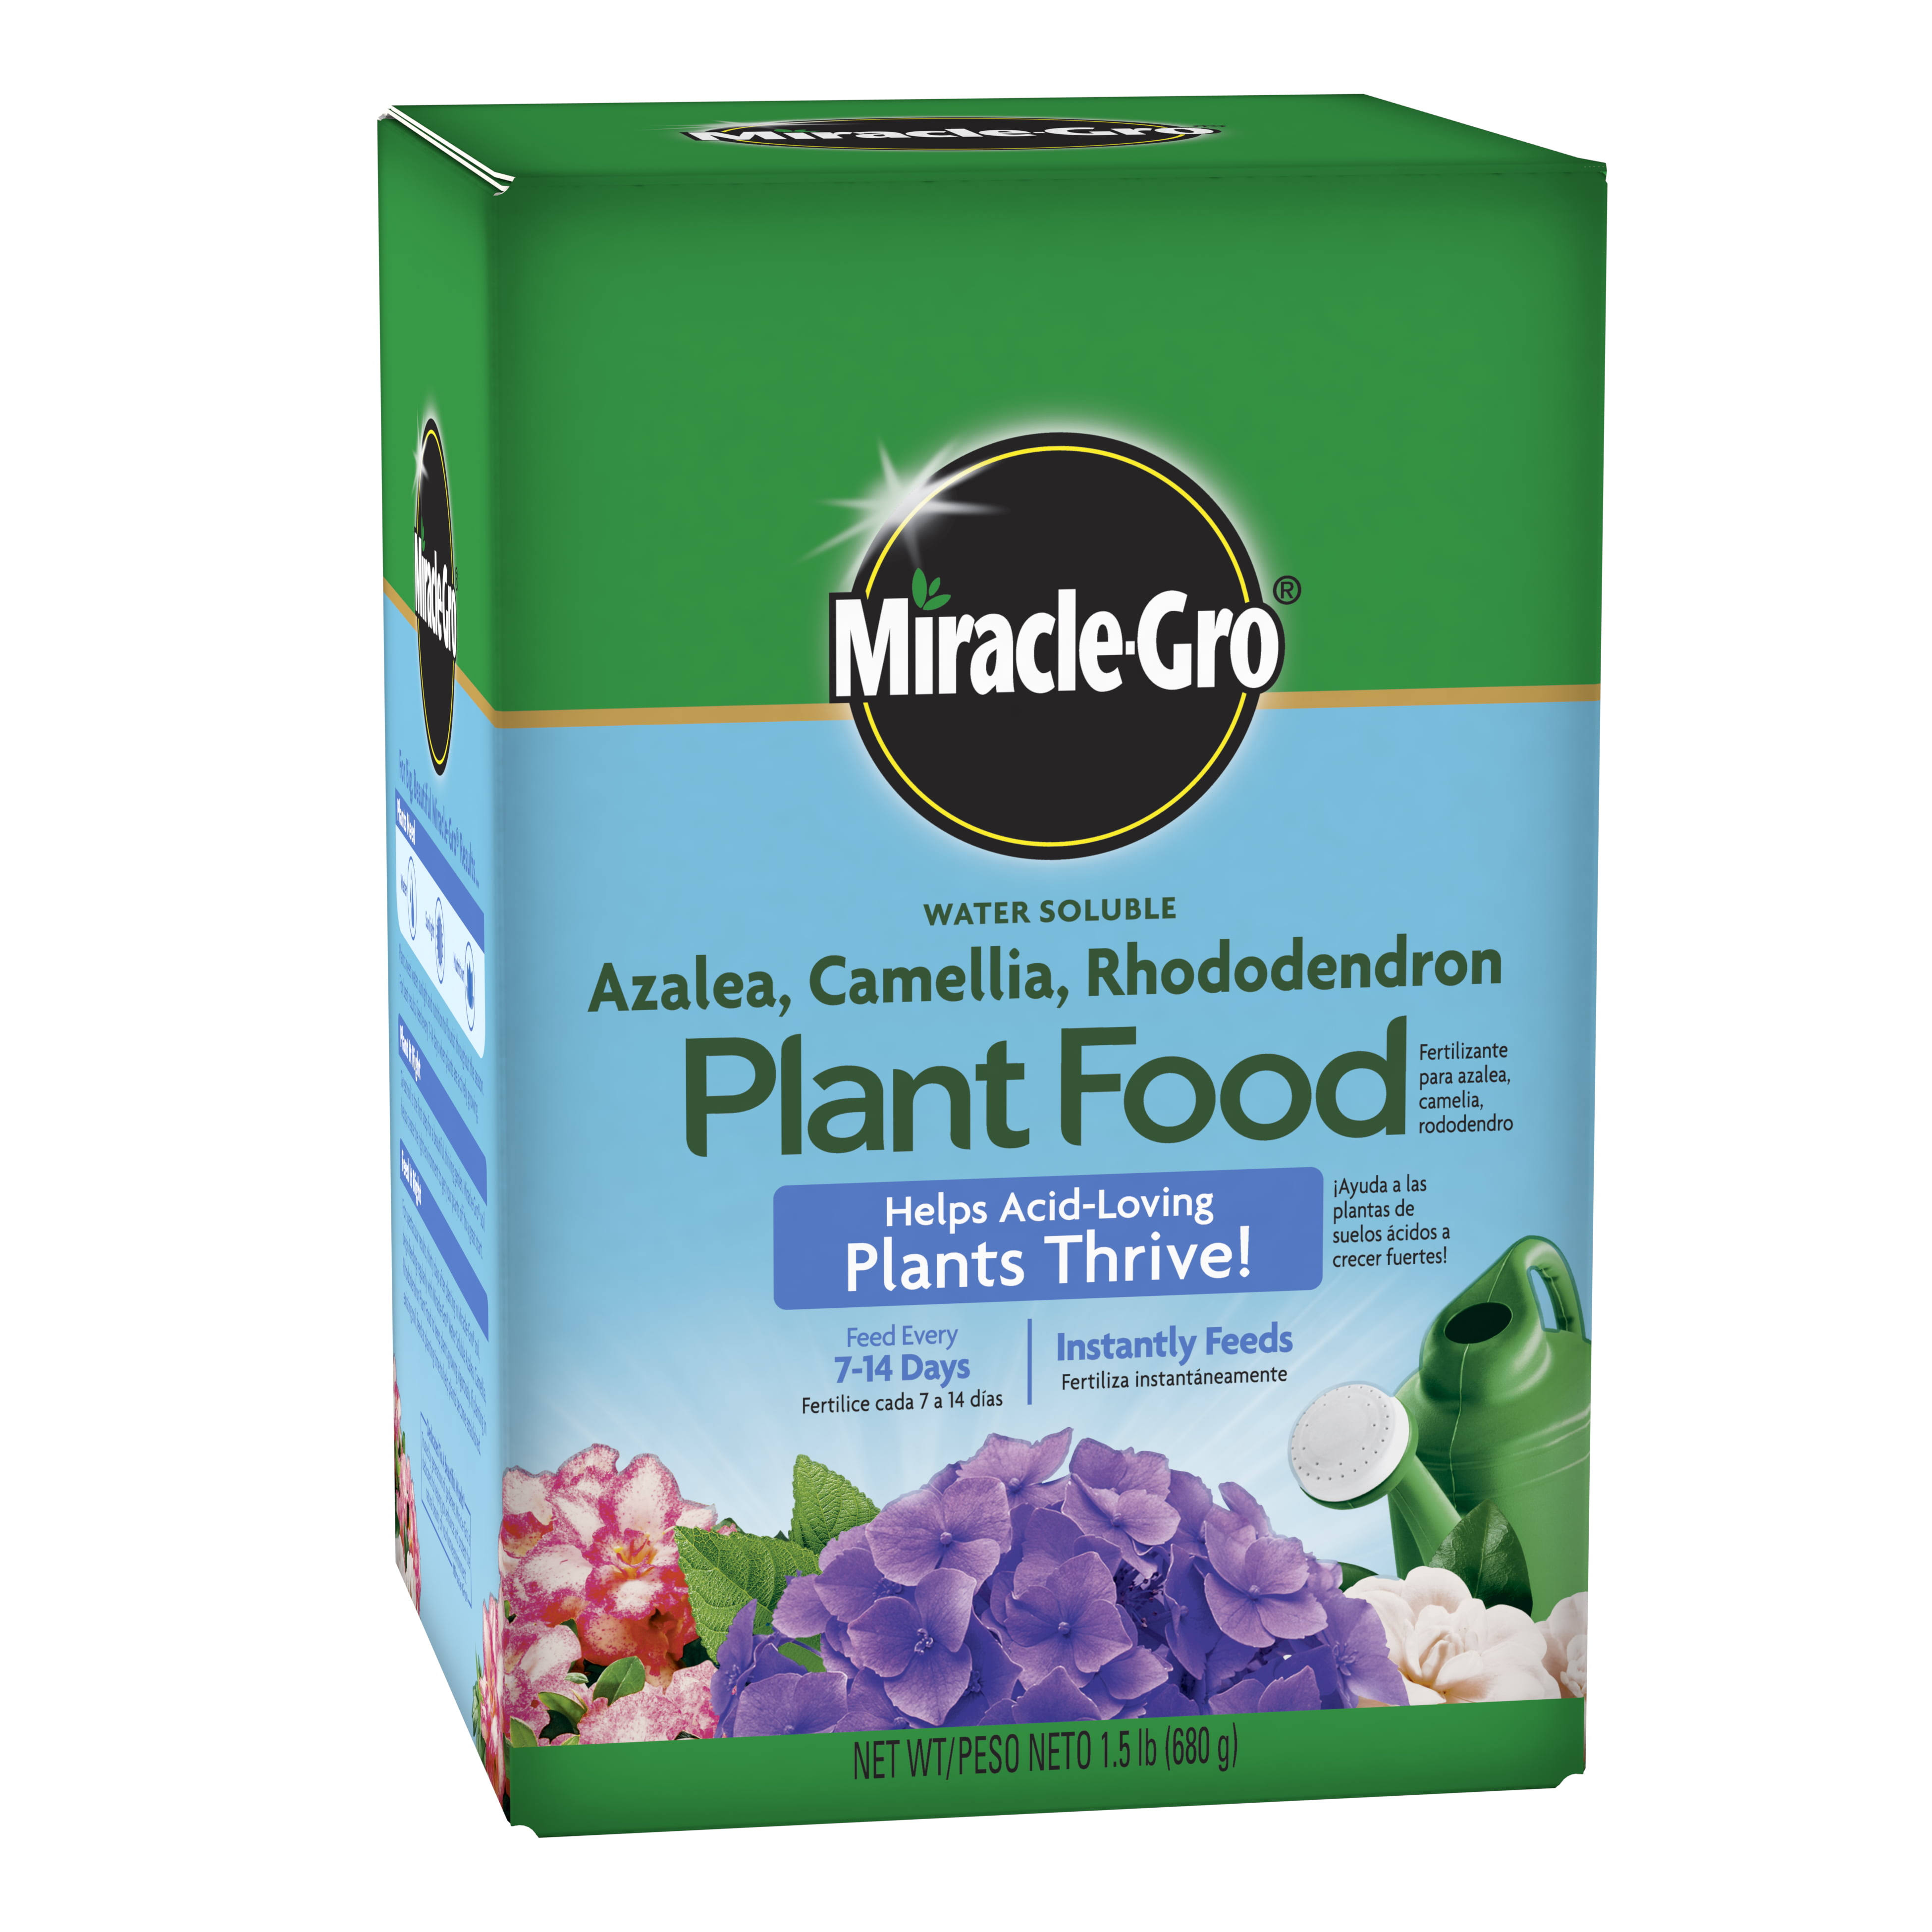 Miracle-Gro 1000701 Plant Food, 1.5 LB